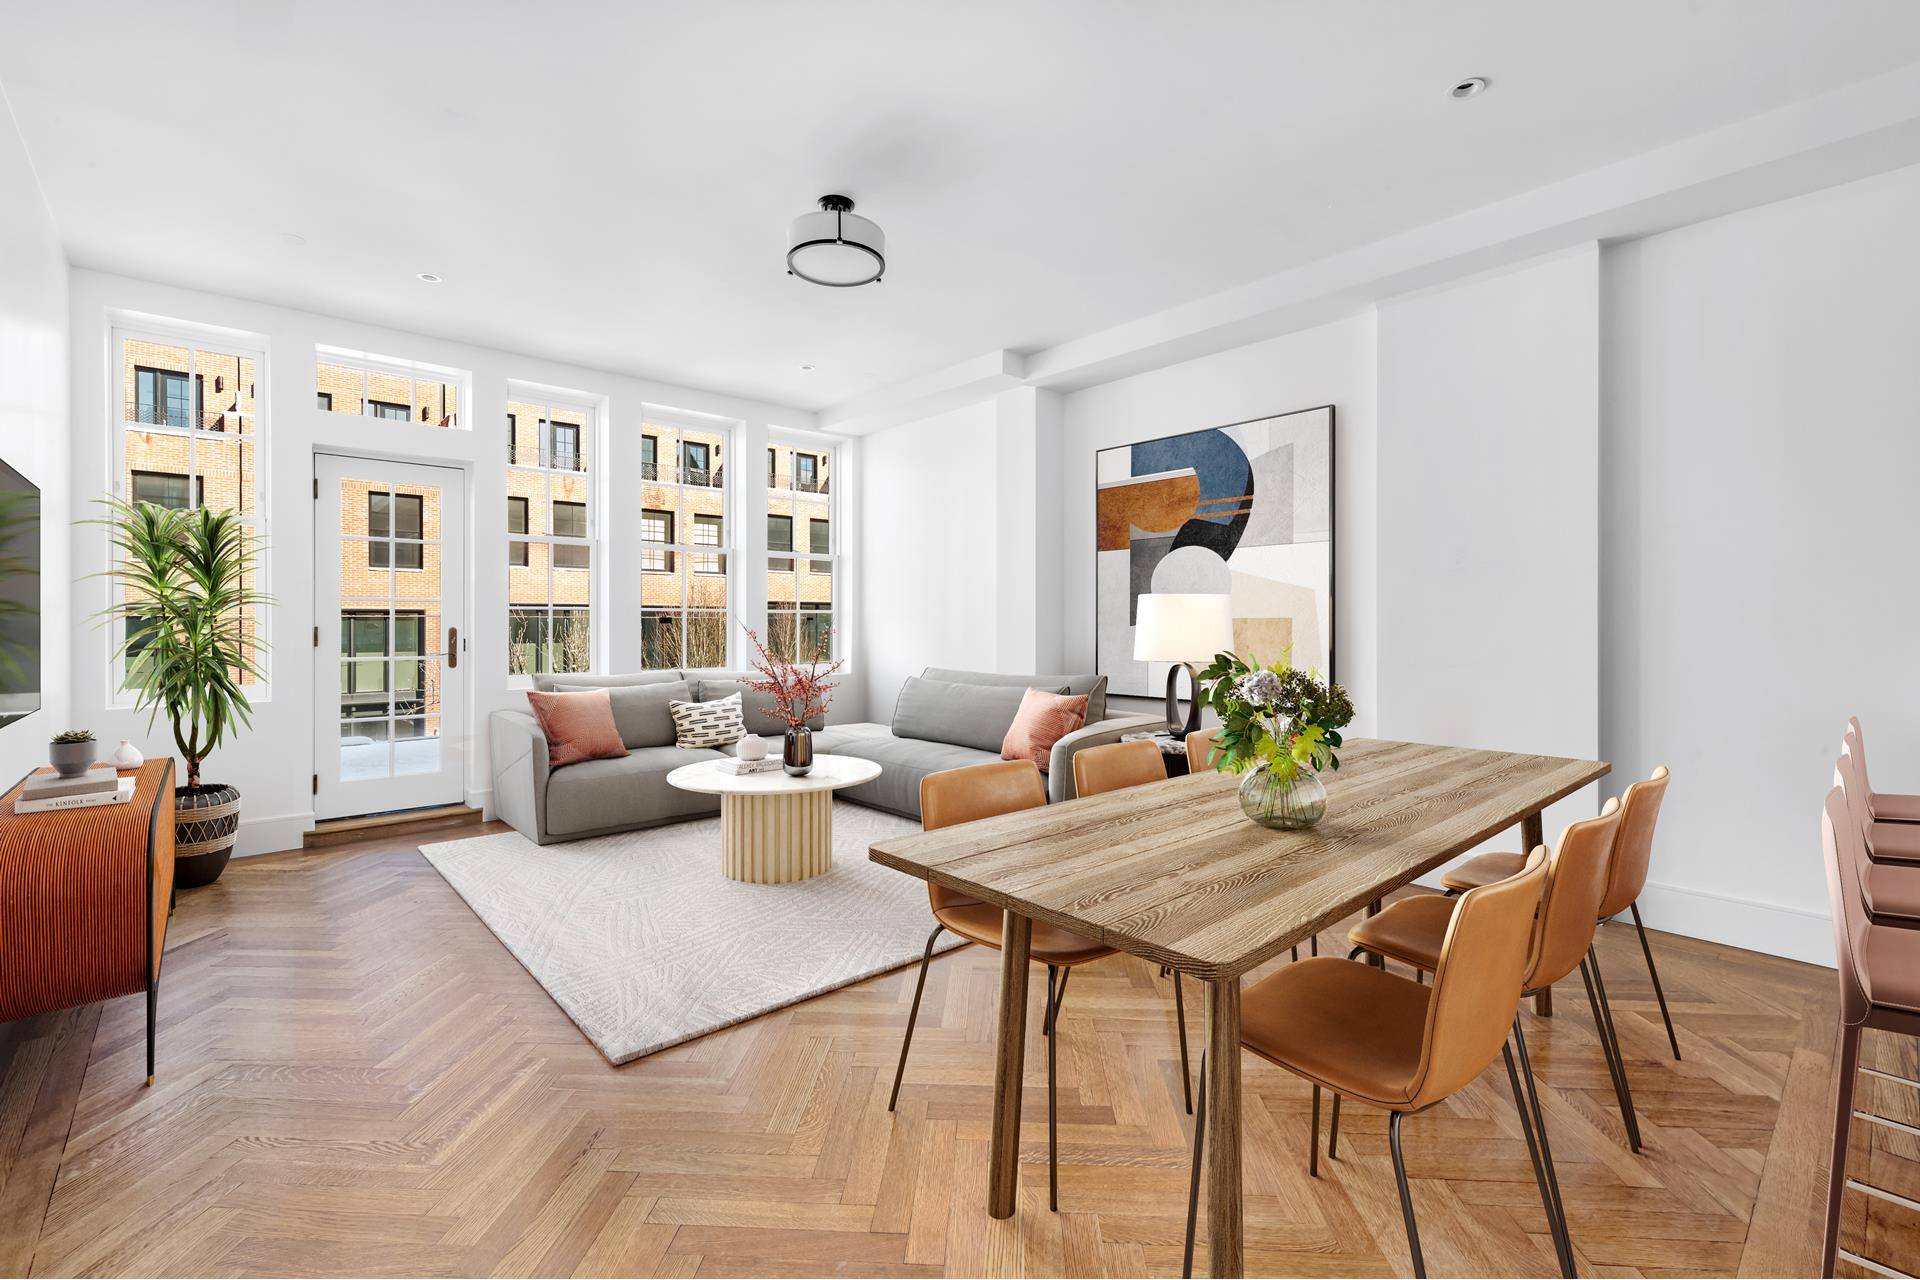 Discover the epitome of luxury living at 119 Congress Street, situated on one of Cobble Hill's most sought after blocks.